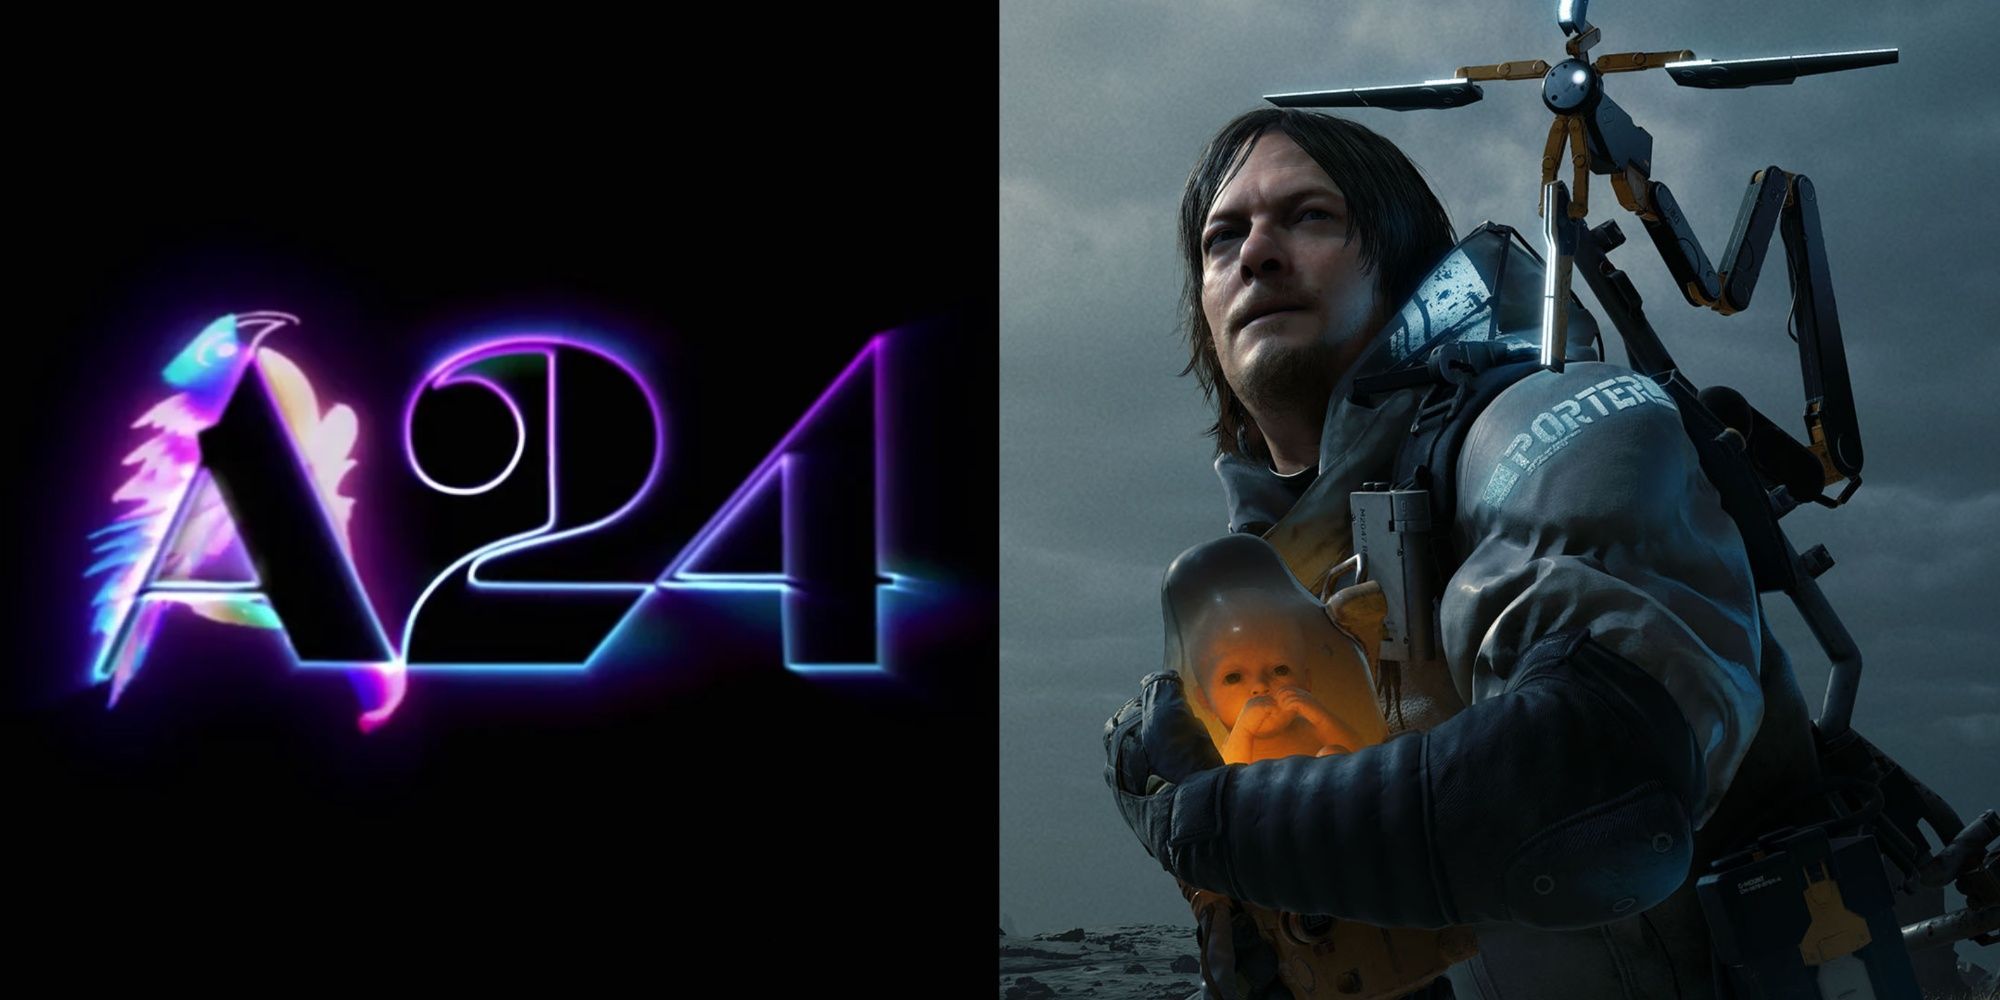 a24 logo and norman reedus holding a baby in death stranding